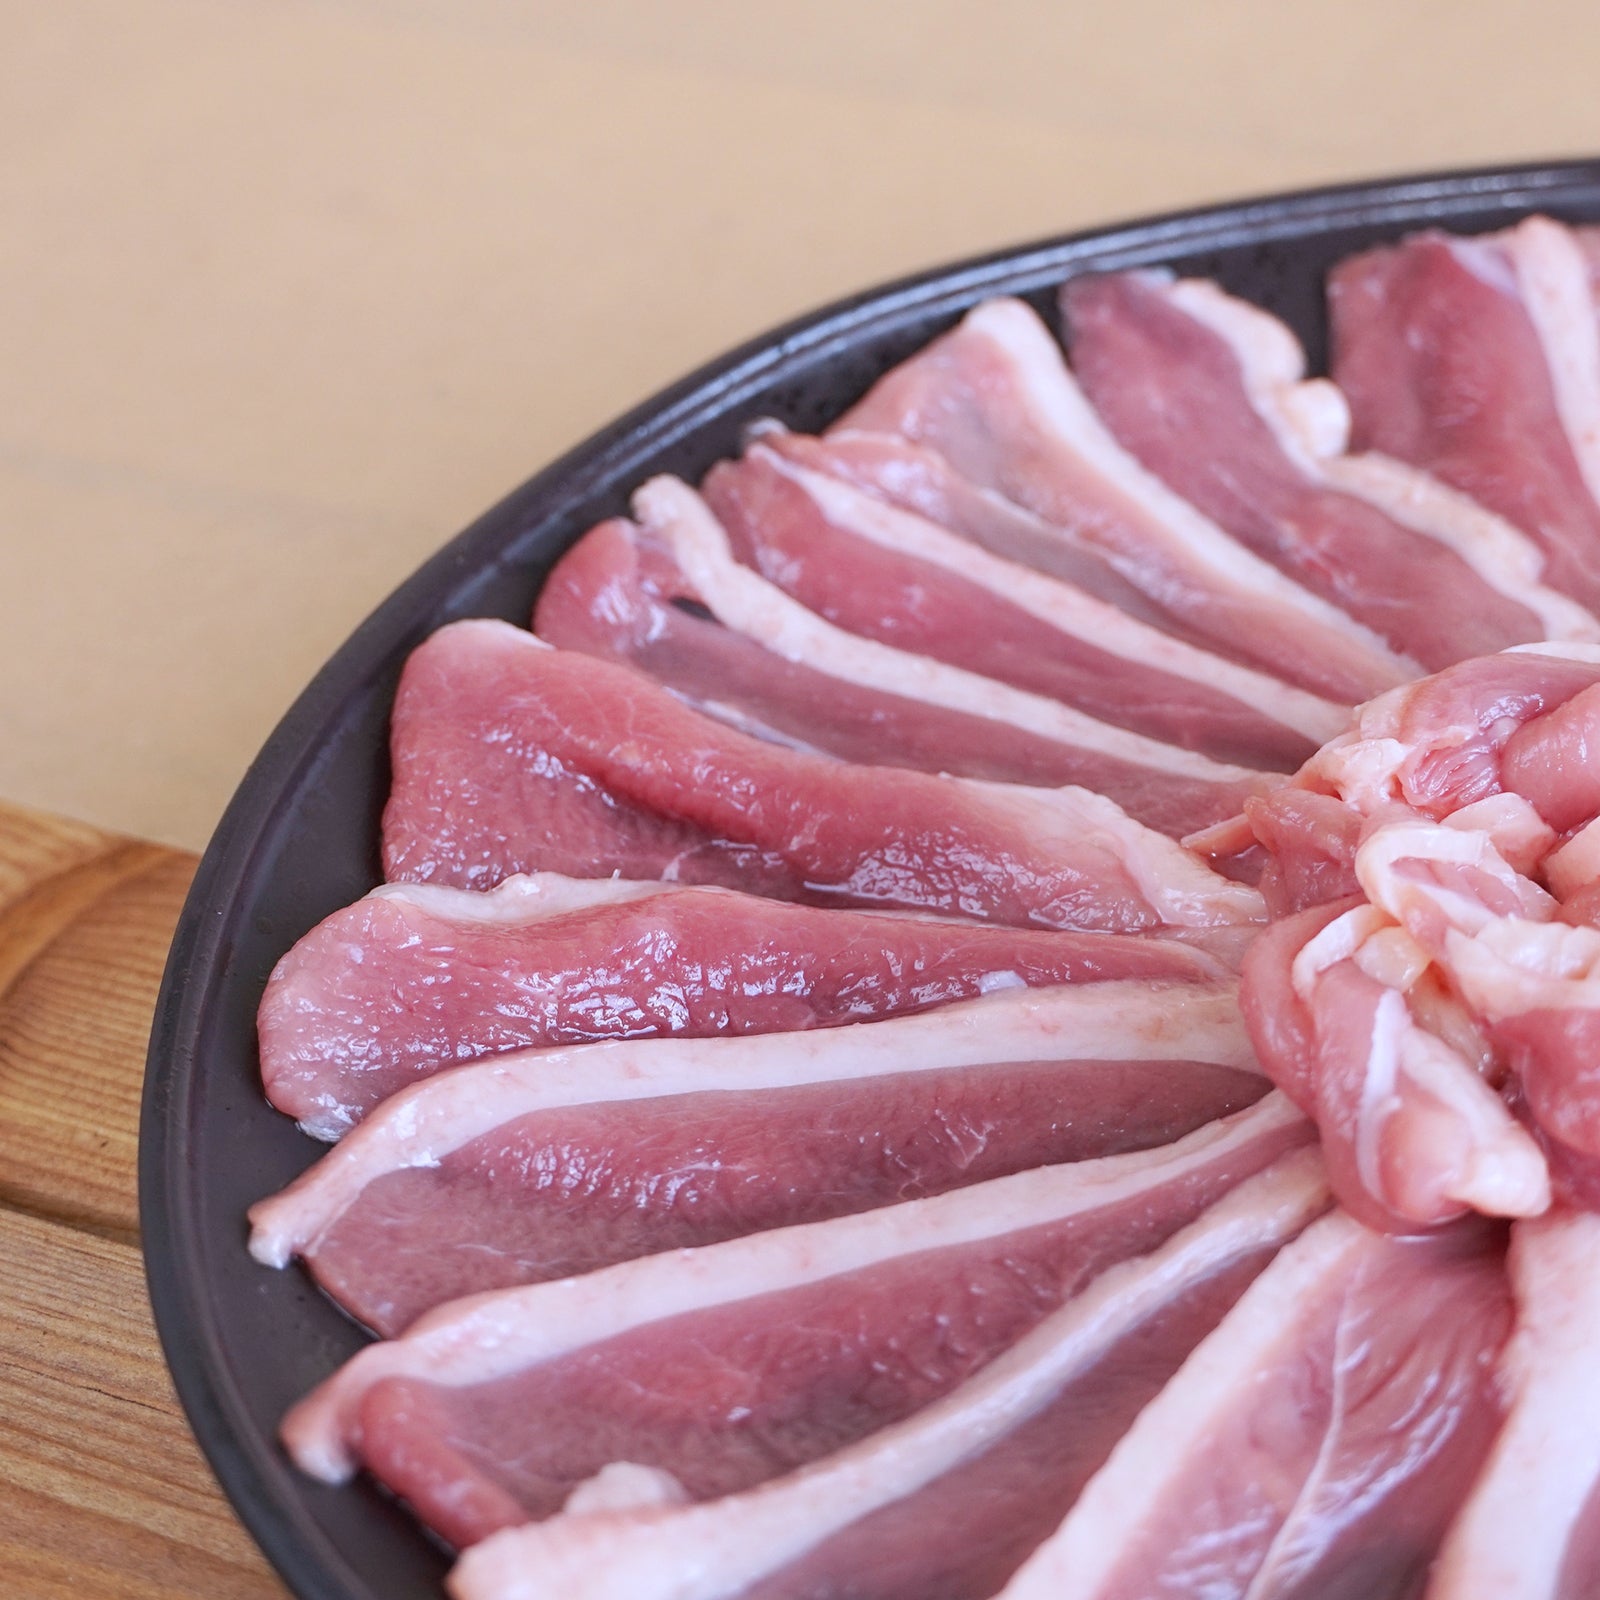 Free-Range Duck Breast Slices from Kyoto (200g) - Horizon Farms